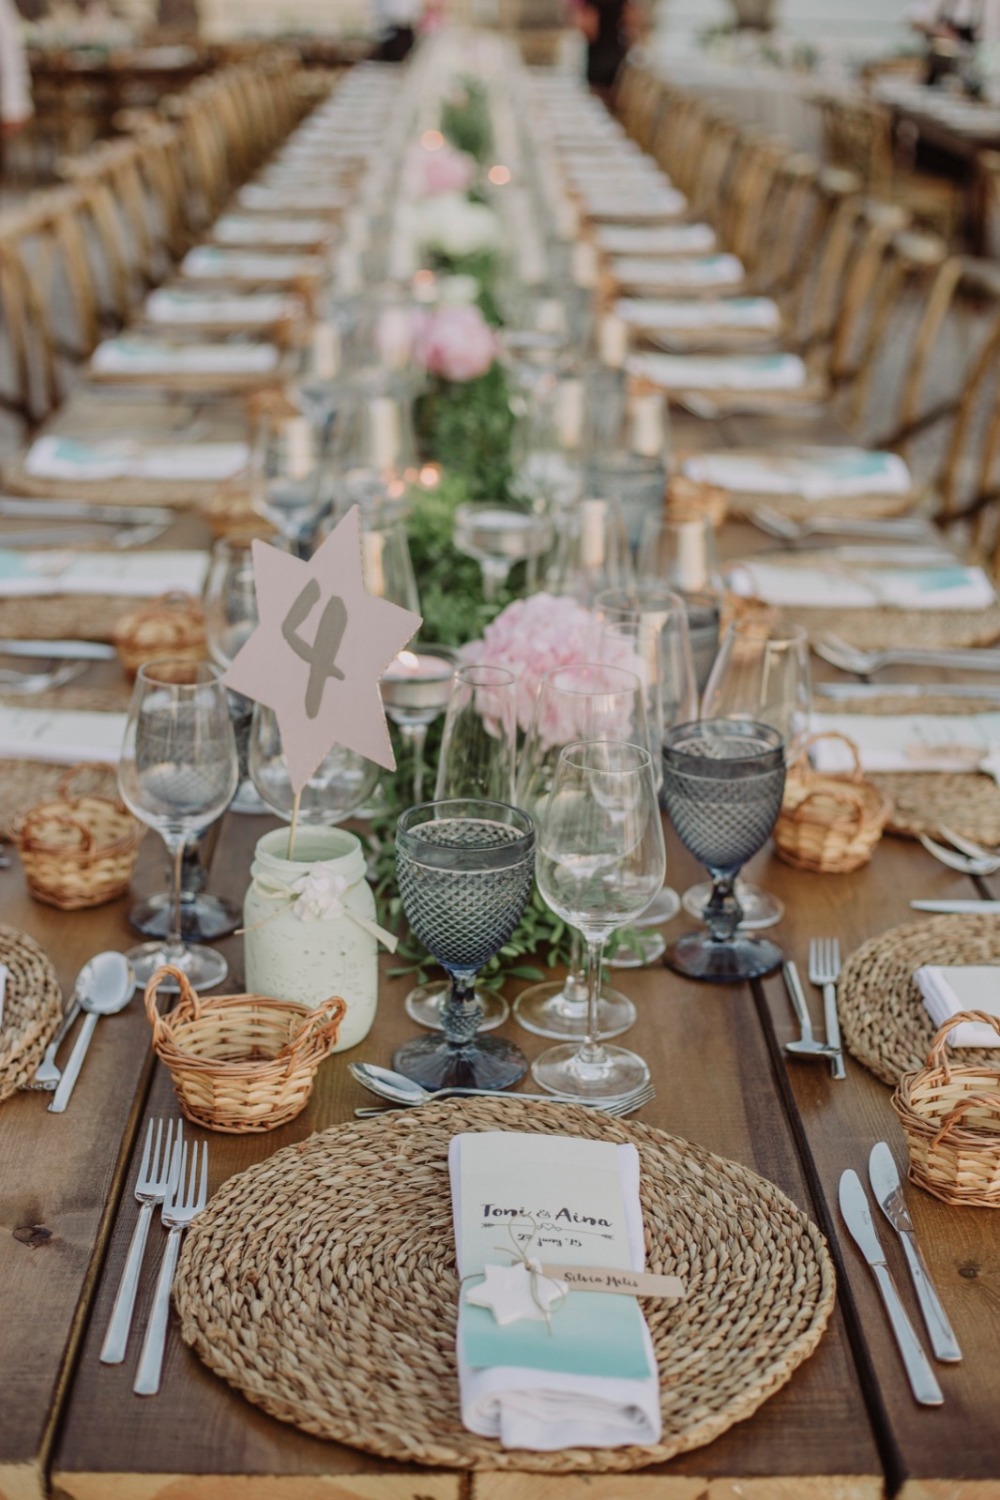 Simple and elegant table decor